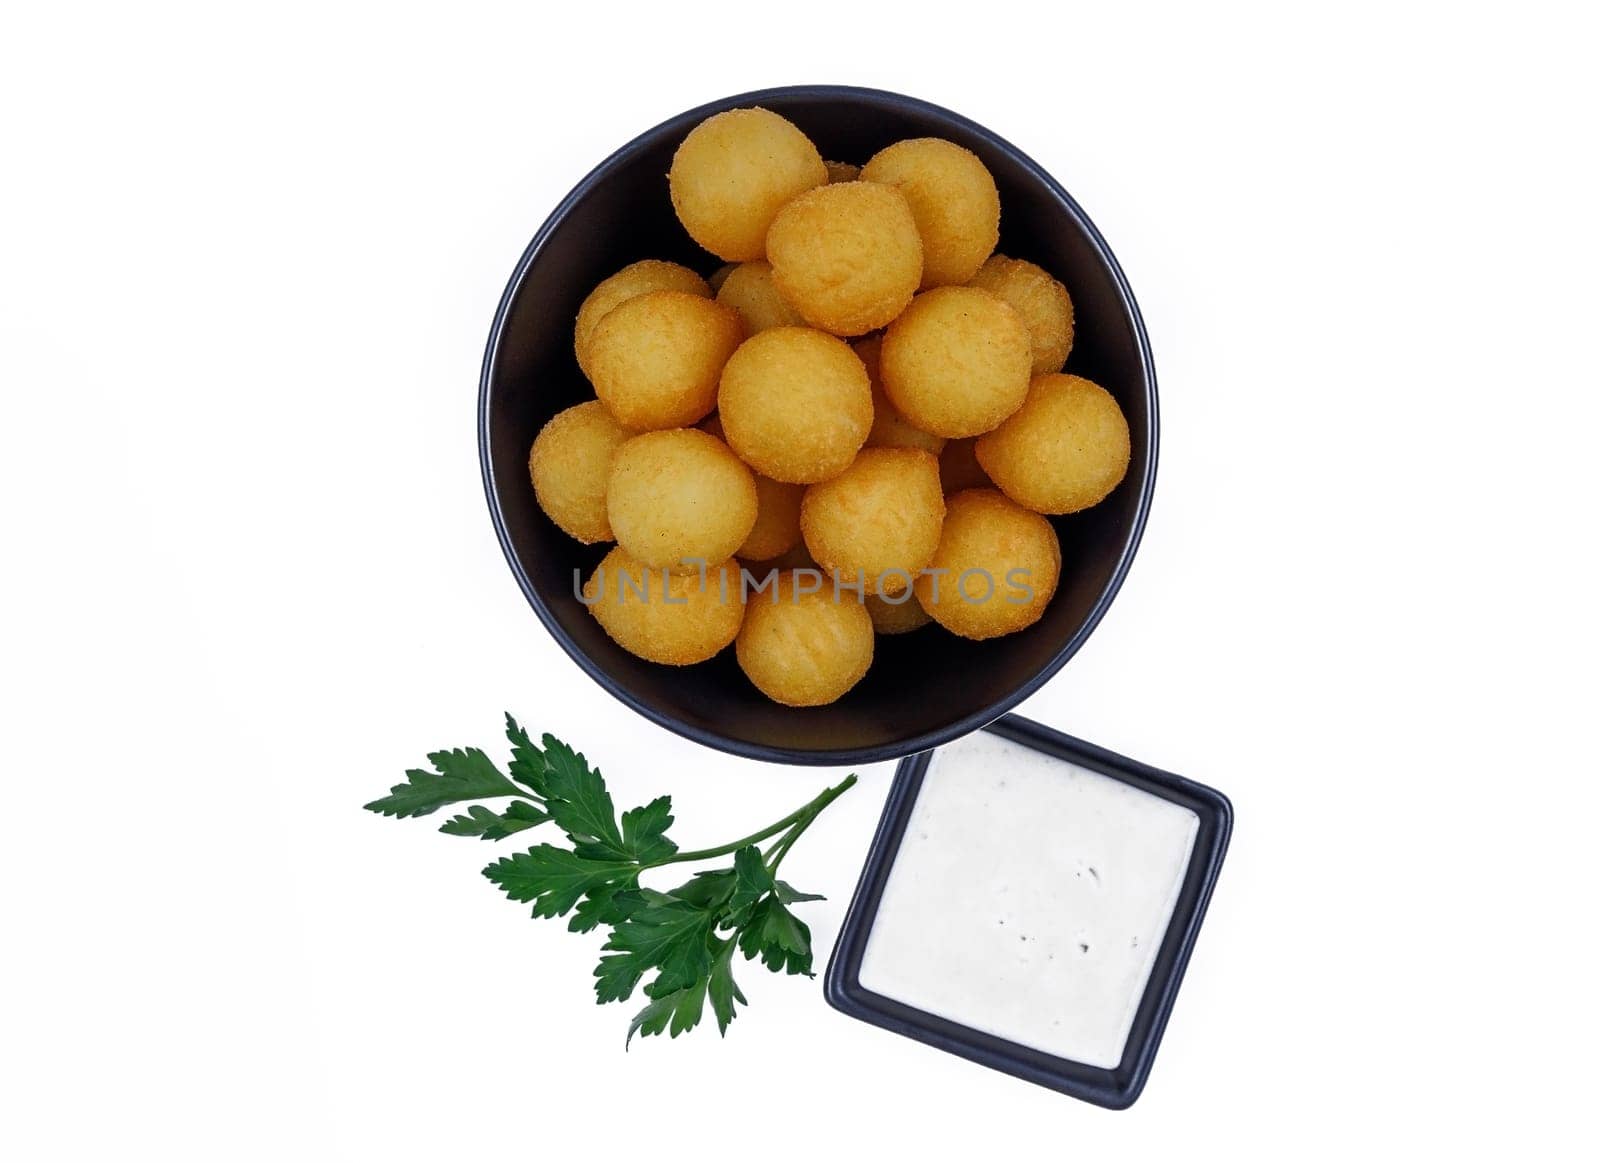 Potato balls in a black plate with sauce and herbs isolated on white background. by Mixa74